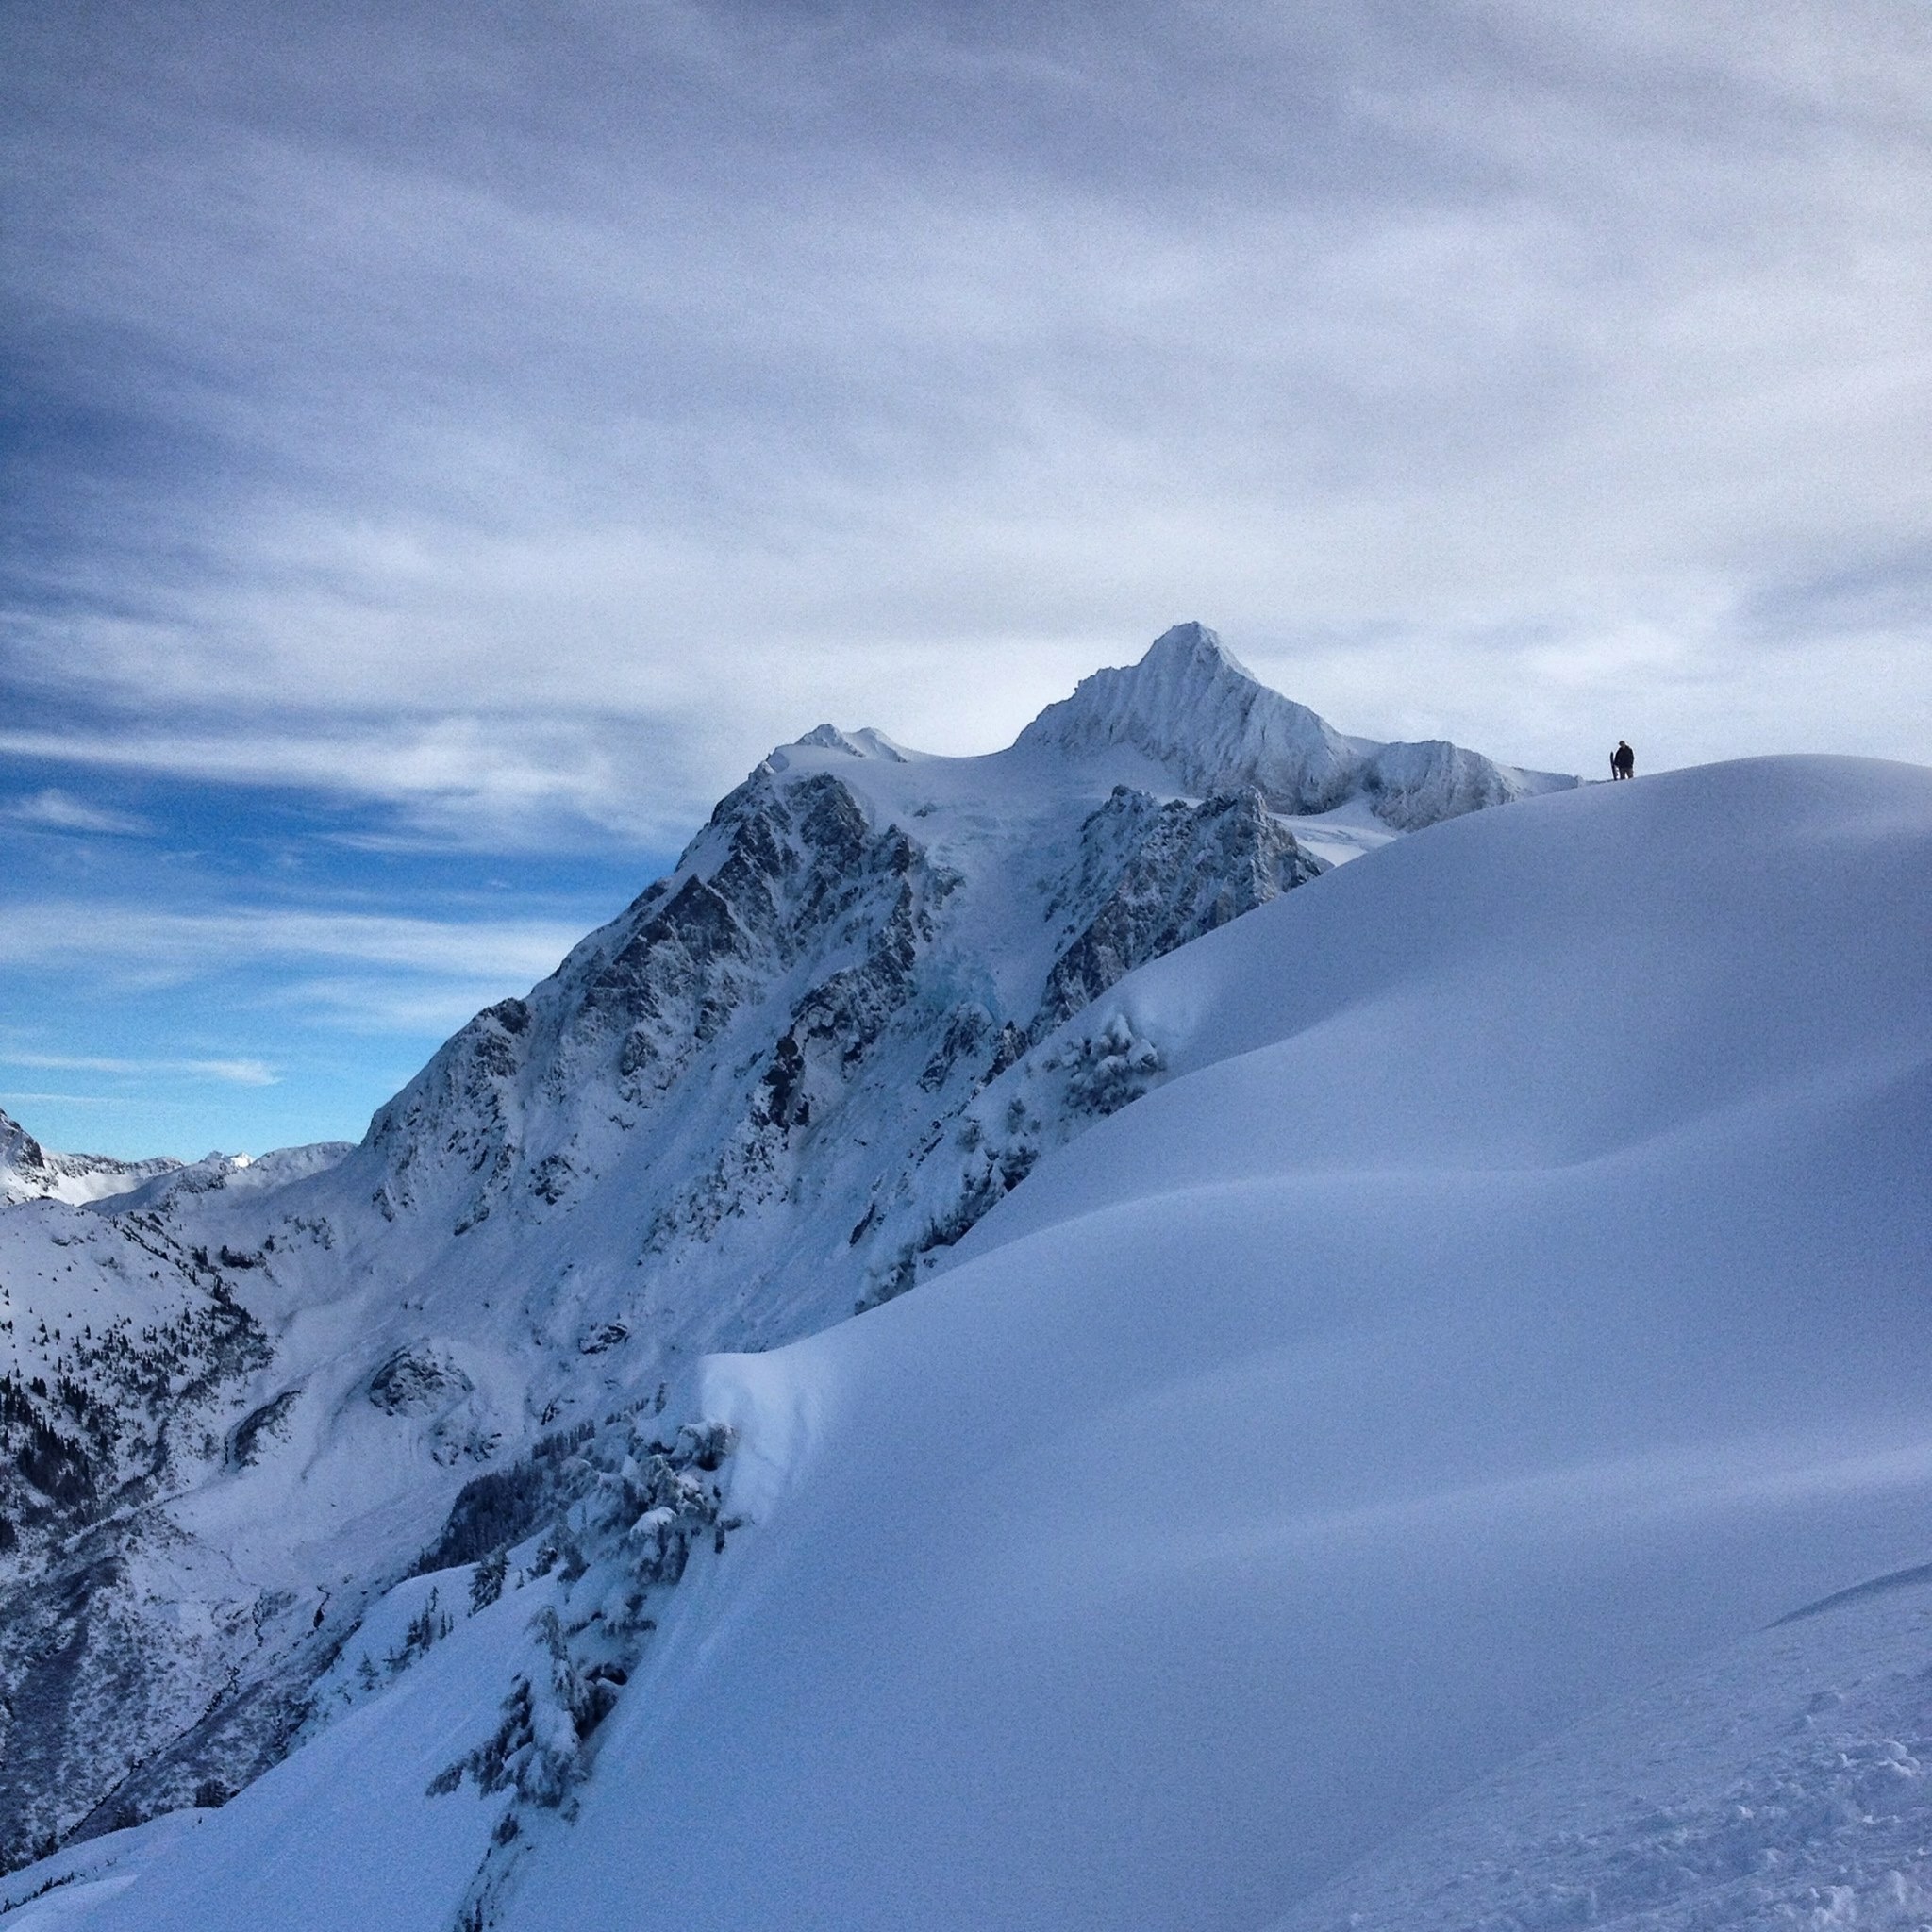 The sun came out for some sunny laps on the Shuksan Arm 12/10/15 Photo: Allison Andrews